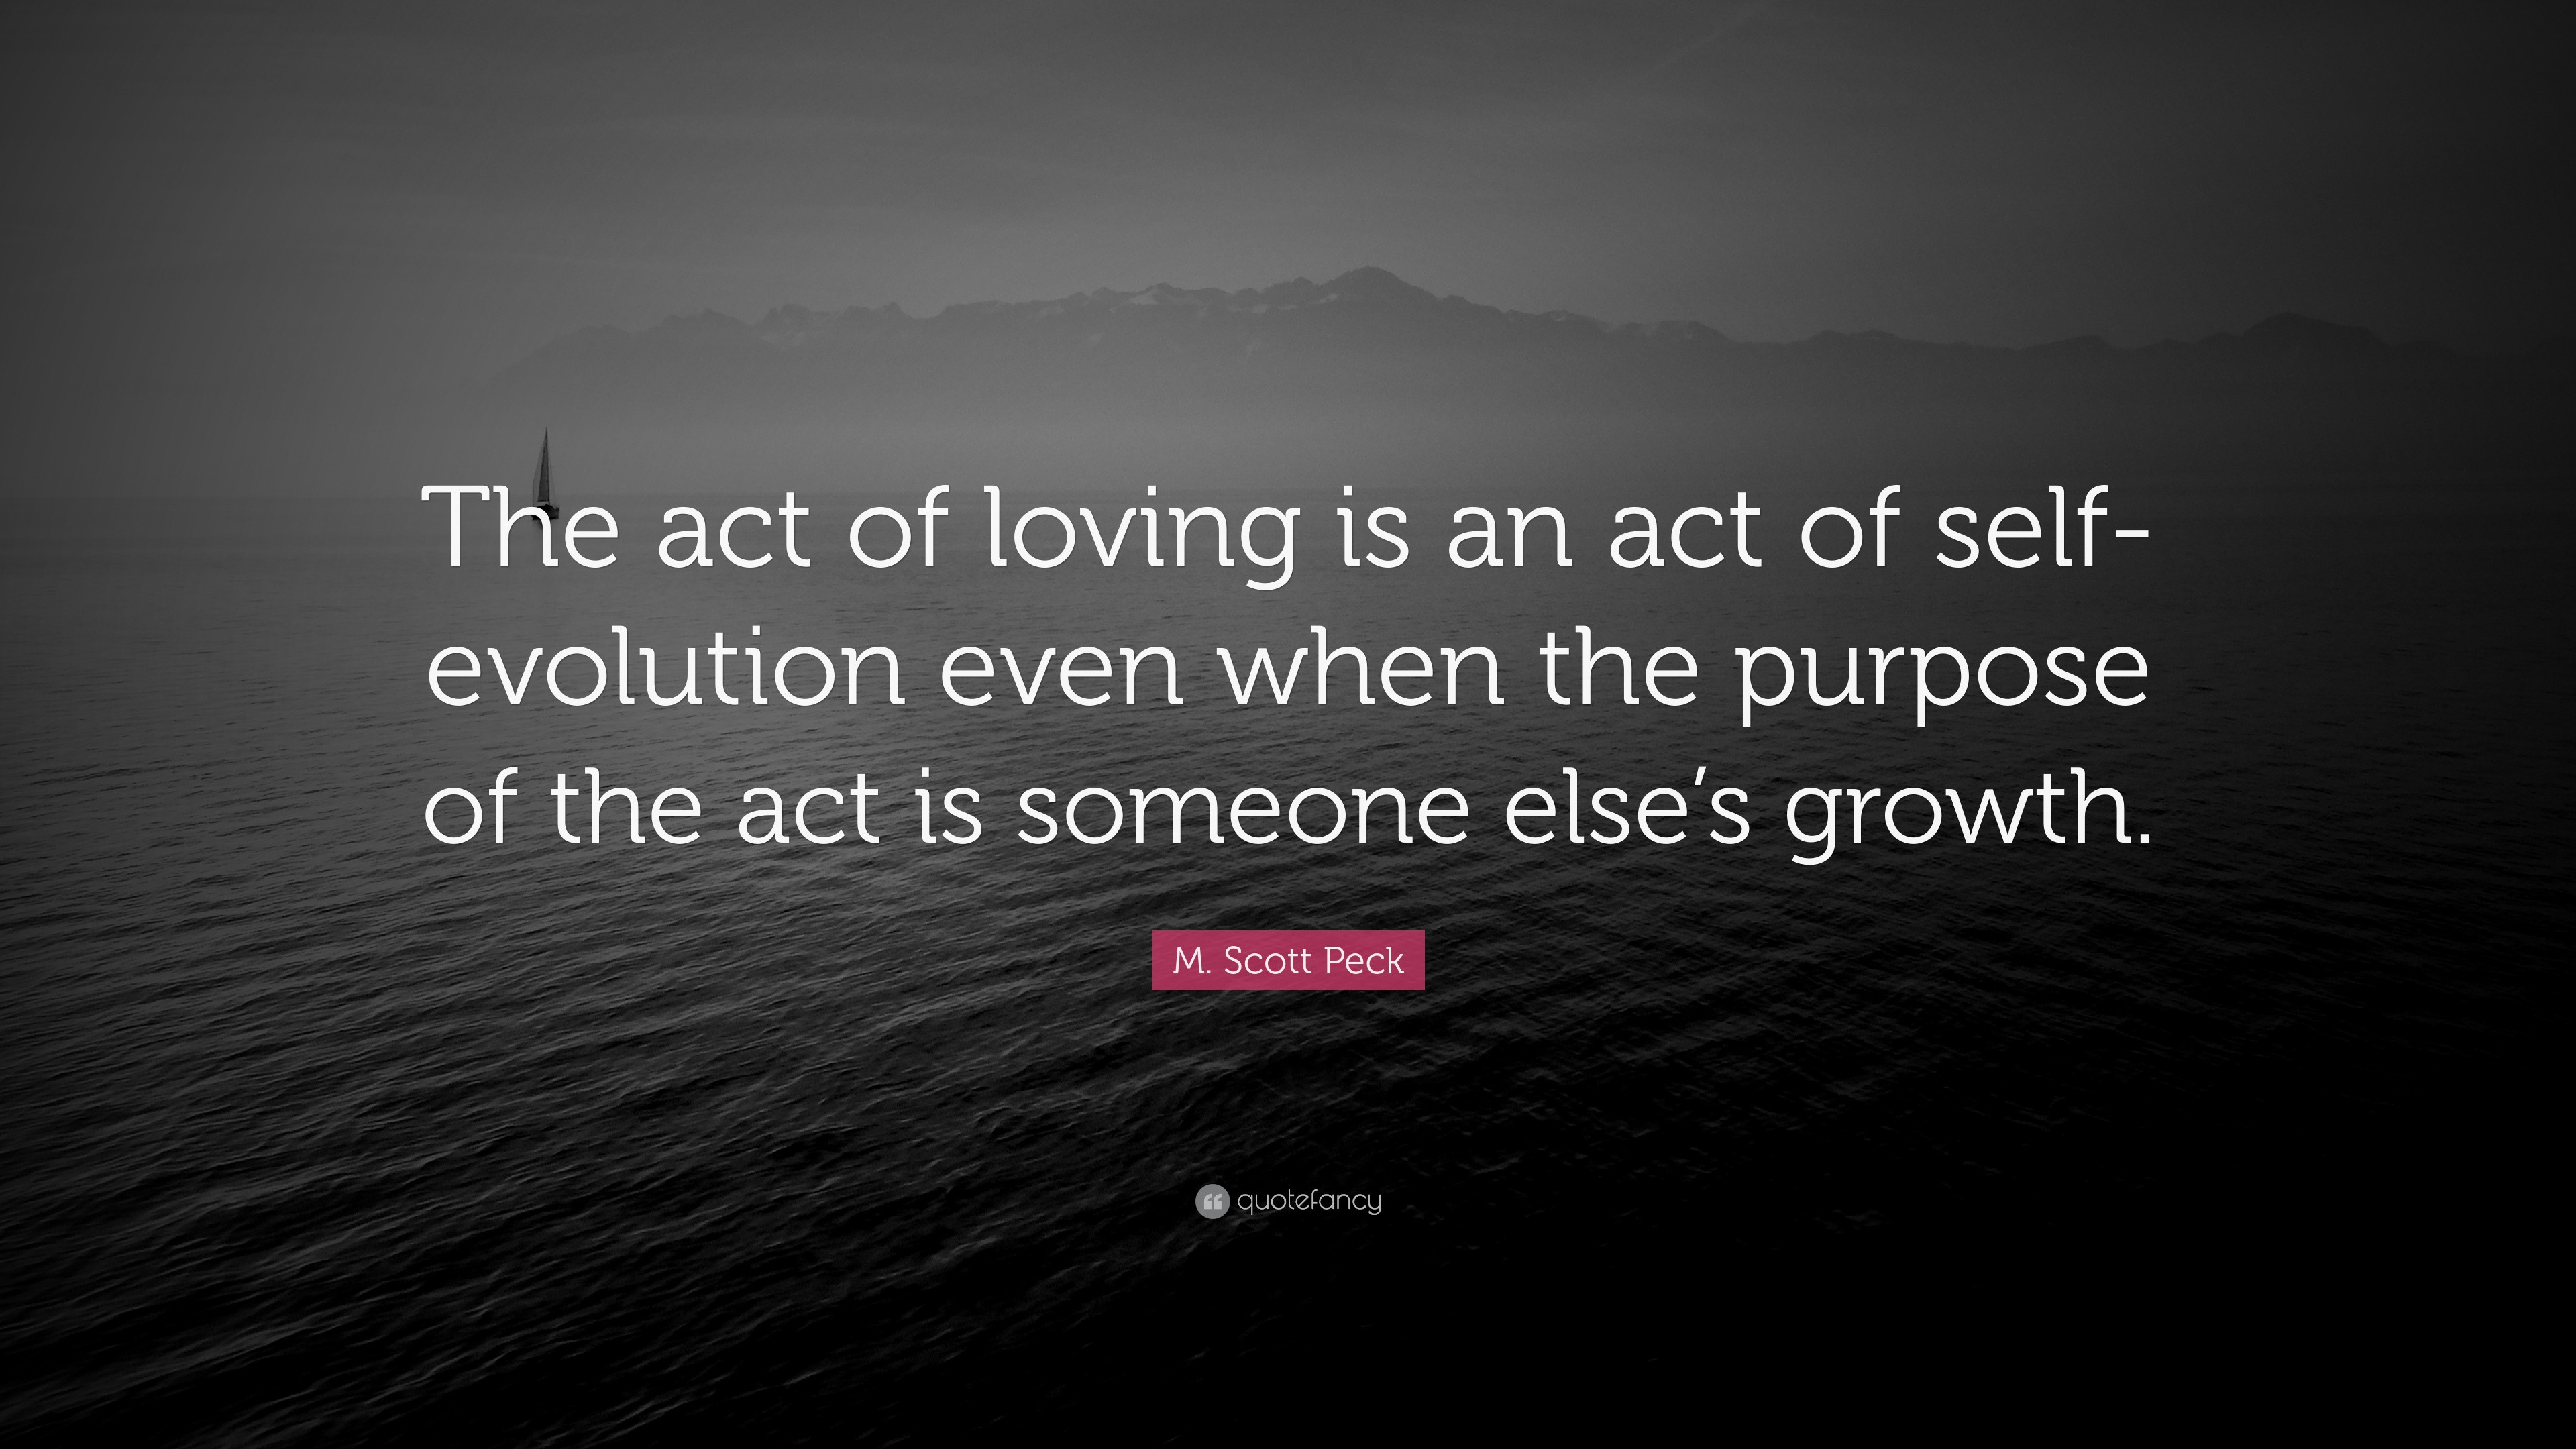 M Scott Peck Quote “The act of loving is an act of self